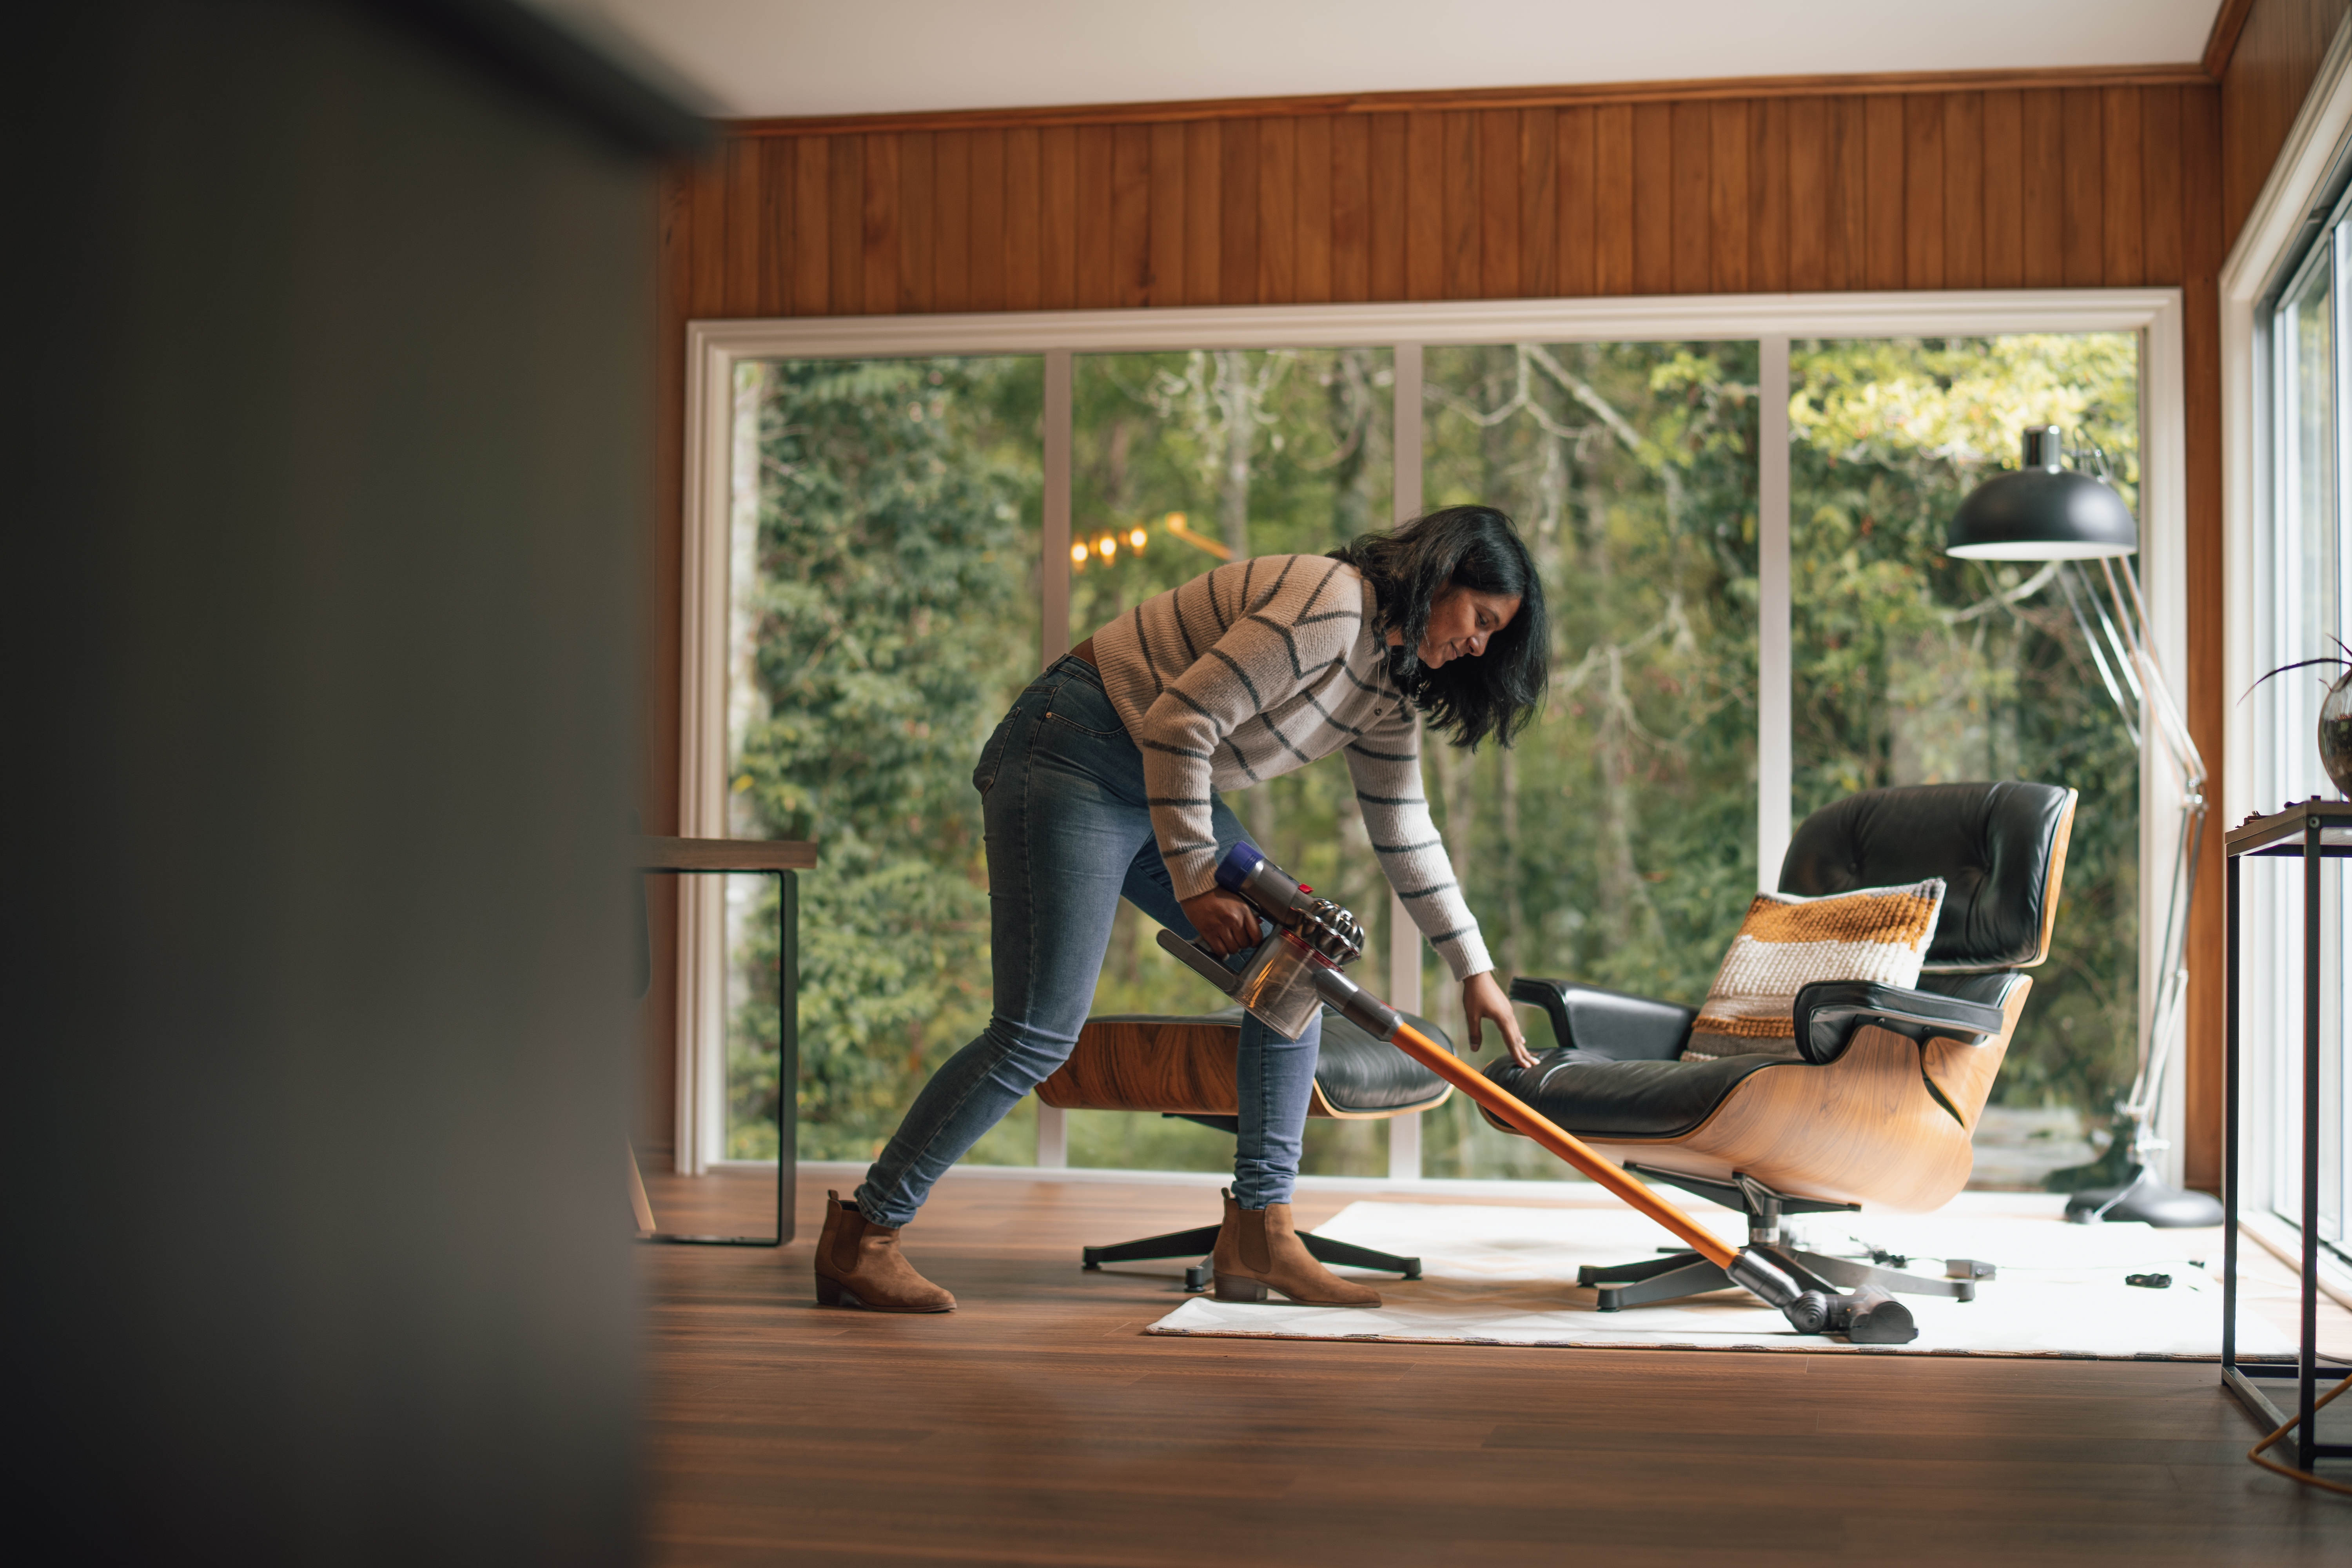 Cleaning up the house before open homes